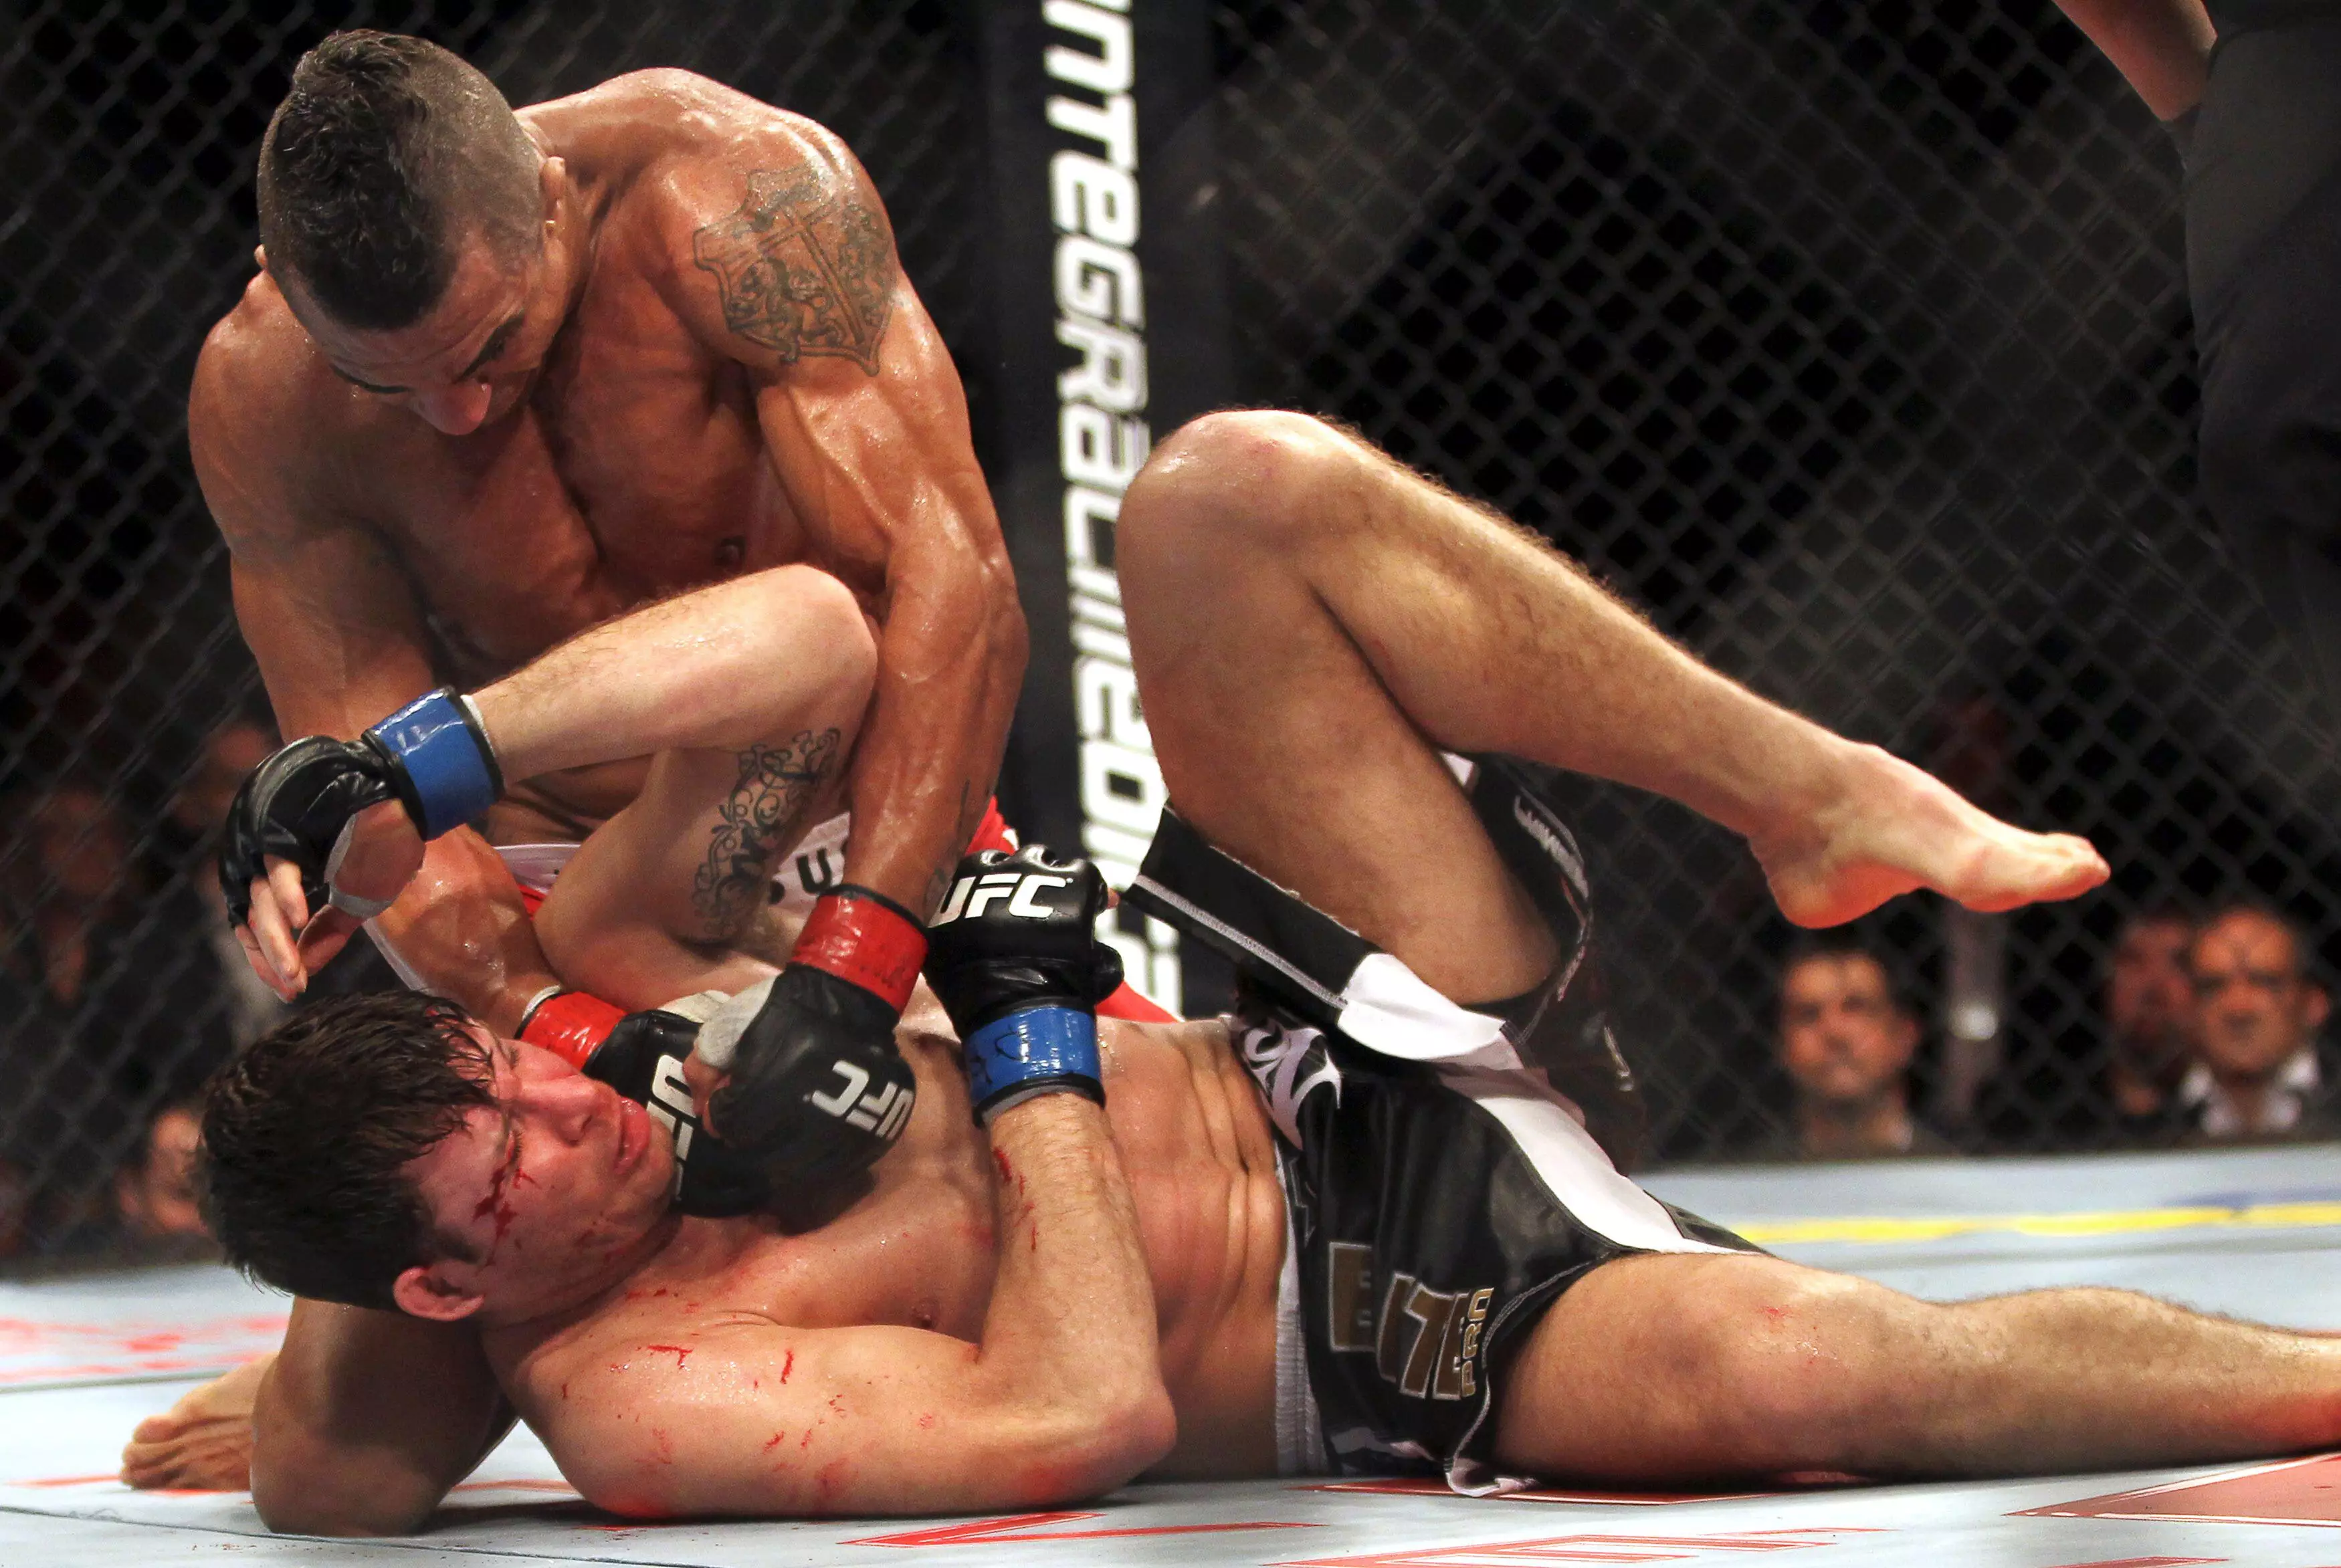 He detached his retina after taking a kick to the head during his 2013 loss to Vitor Belfort.